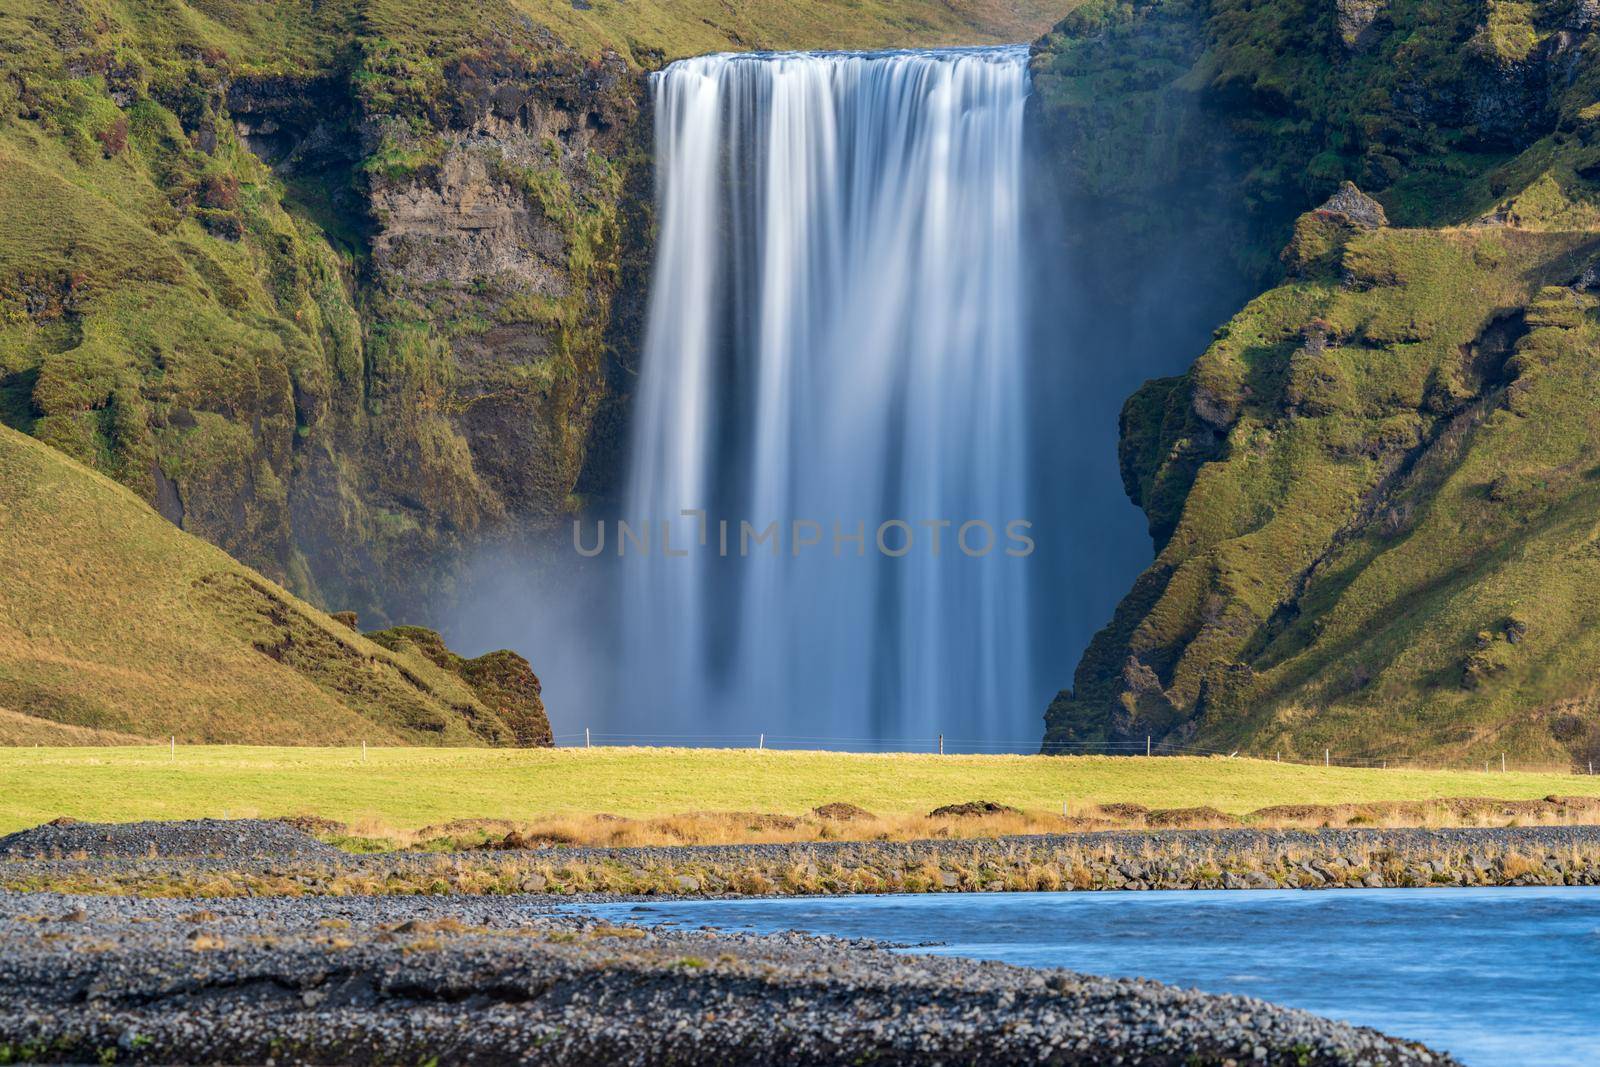 Long exposure of Skogafoss waterfall in Iceland from the distance river by FerradalFCG